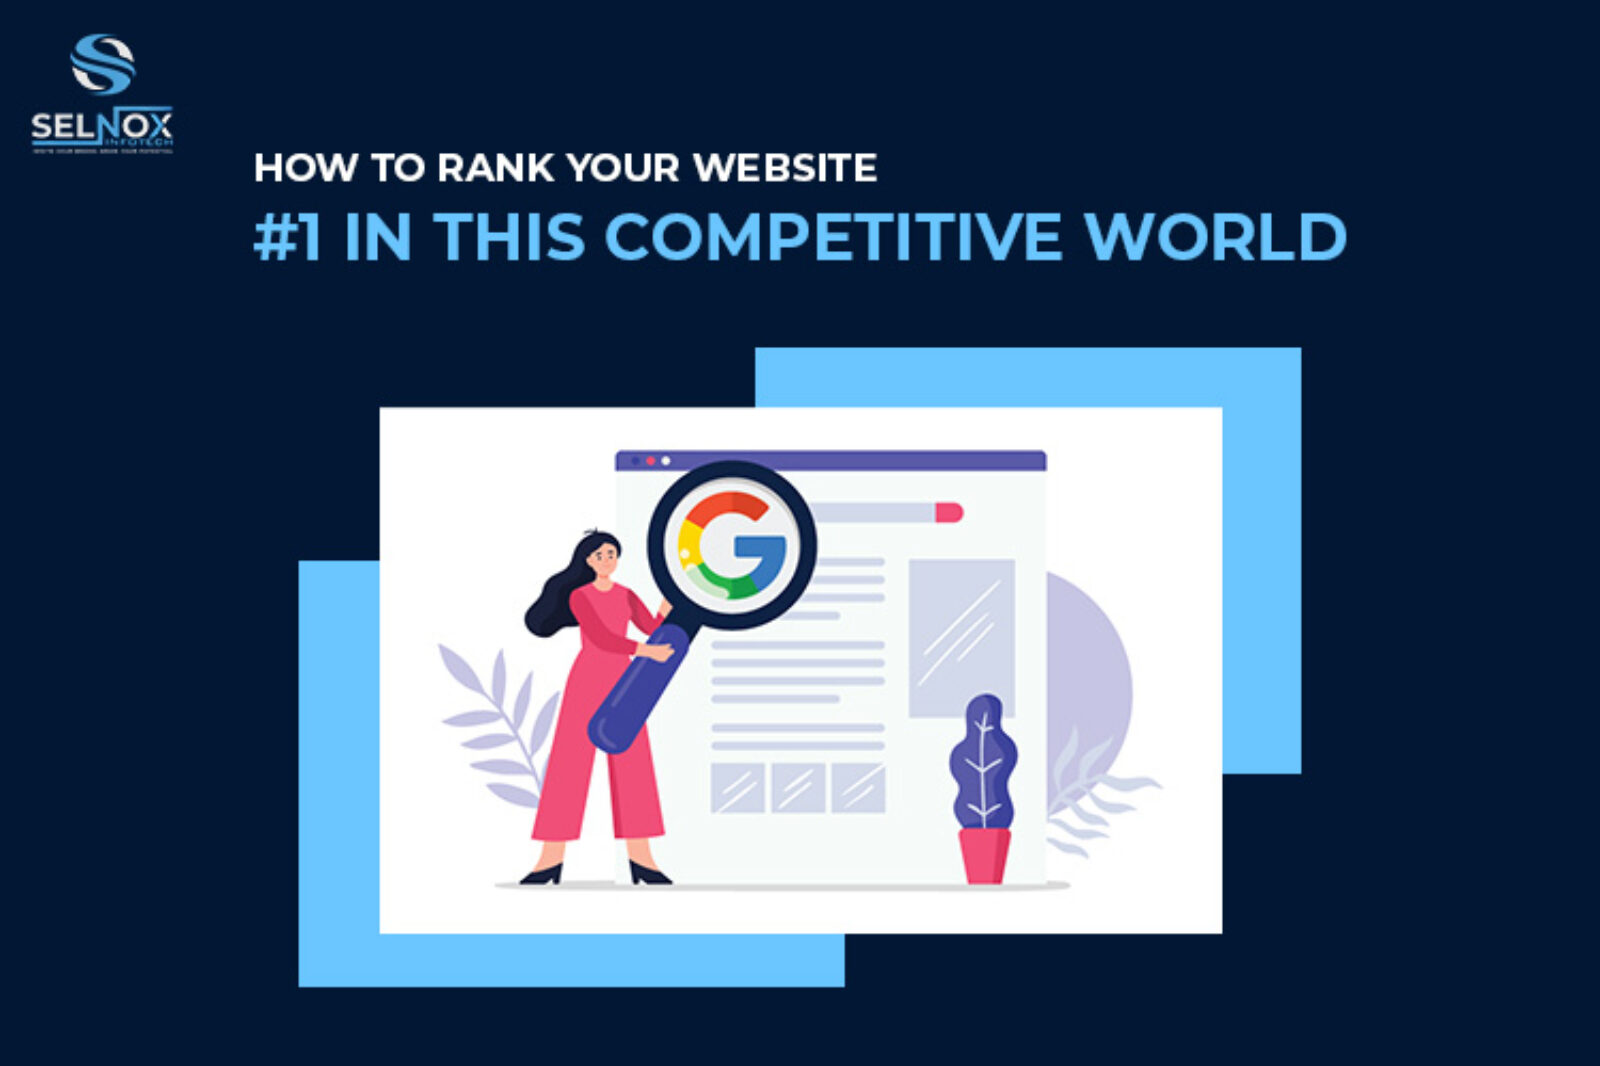 How to Rank Your Website #1 in this Competitive World | Selnox Infotech